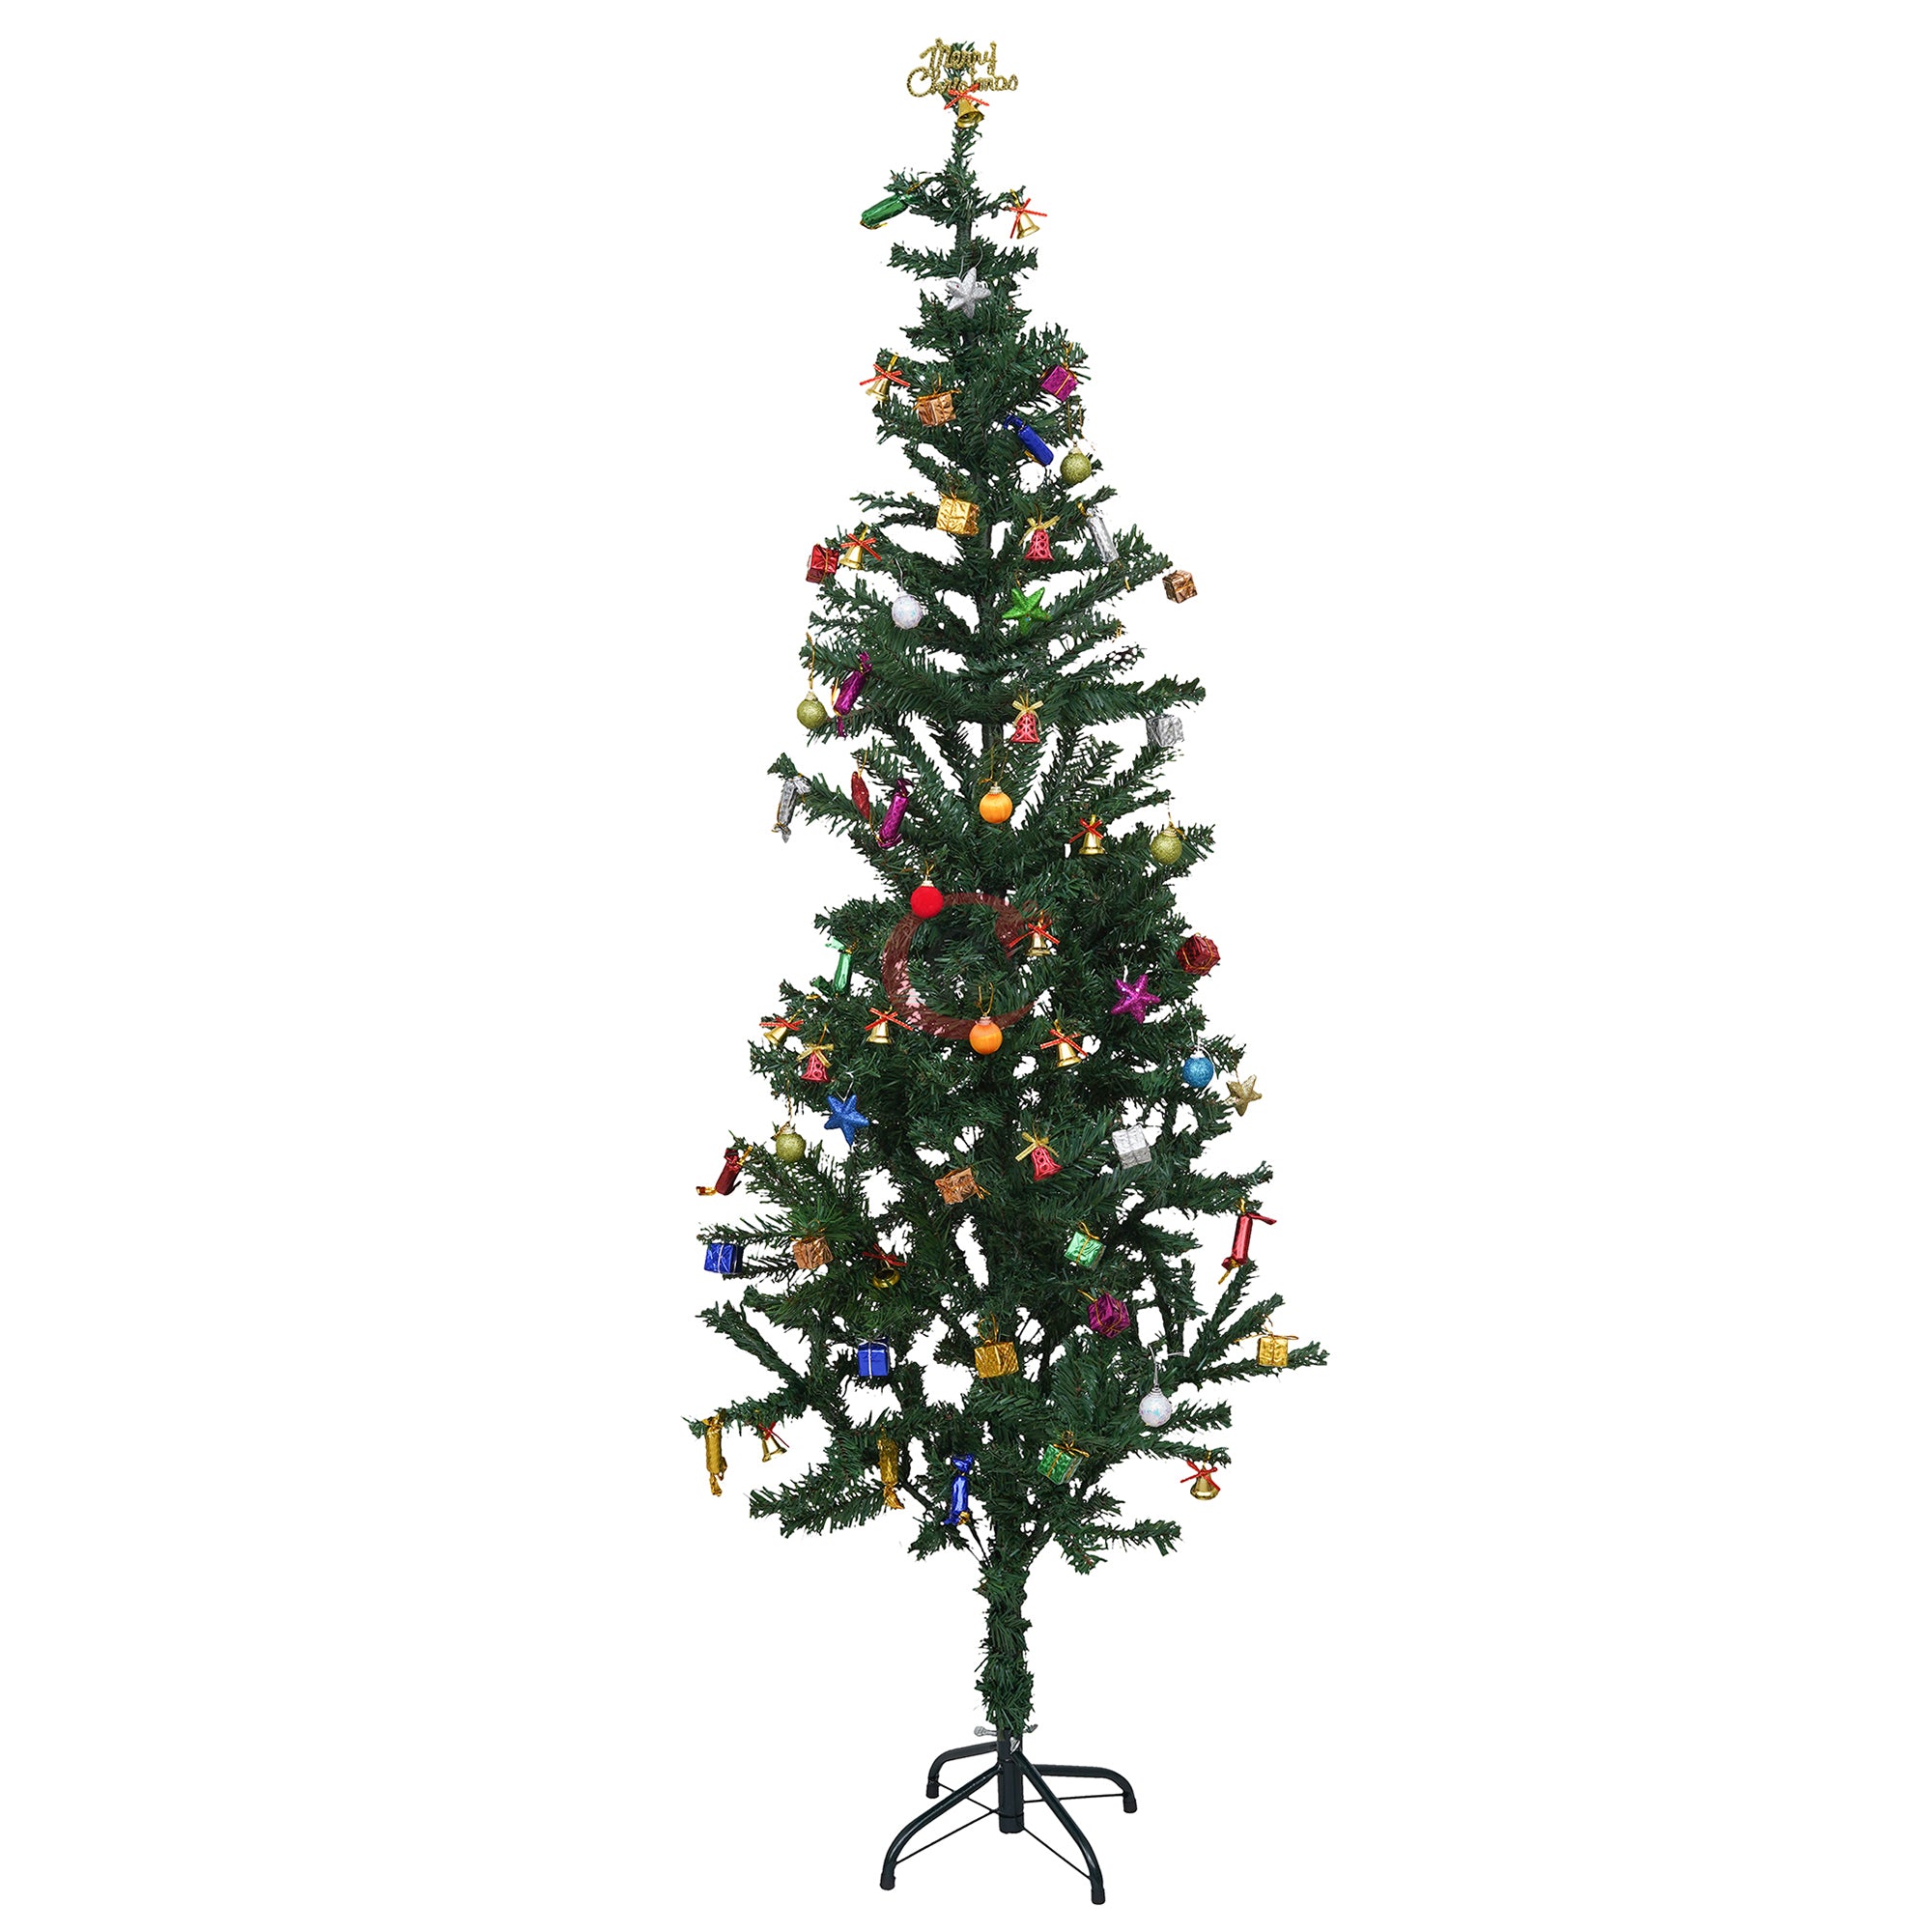 eCraftIndia 5 Feet Green Artificial Christmas Tree Xmas Pine Tree with Metal Stand - Xmas Tree for Indoor, Outdoor, Home, Living Room, Office, Church Decor - Merry Christmas Decoration Item 7